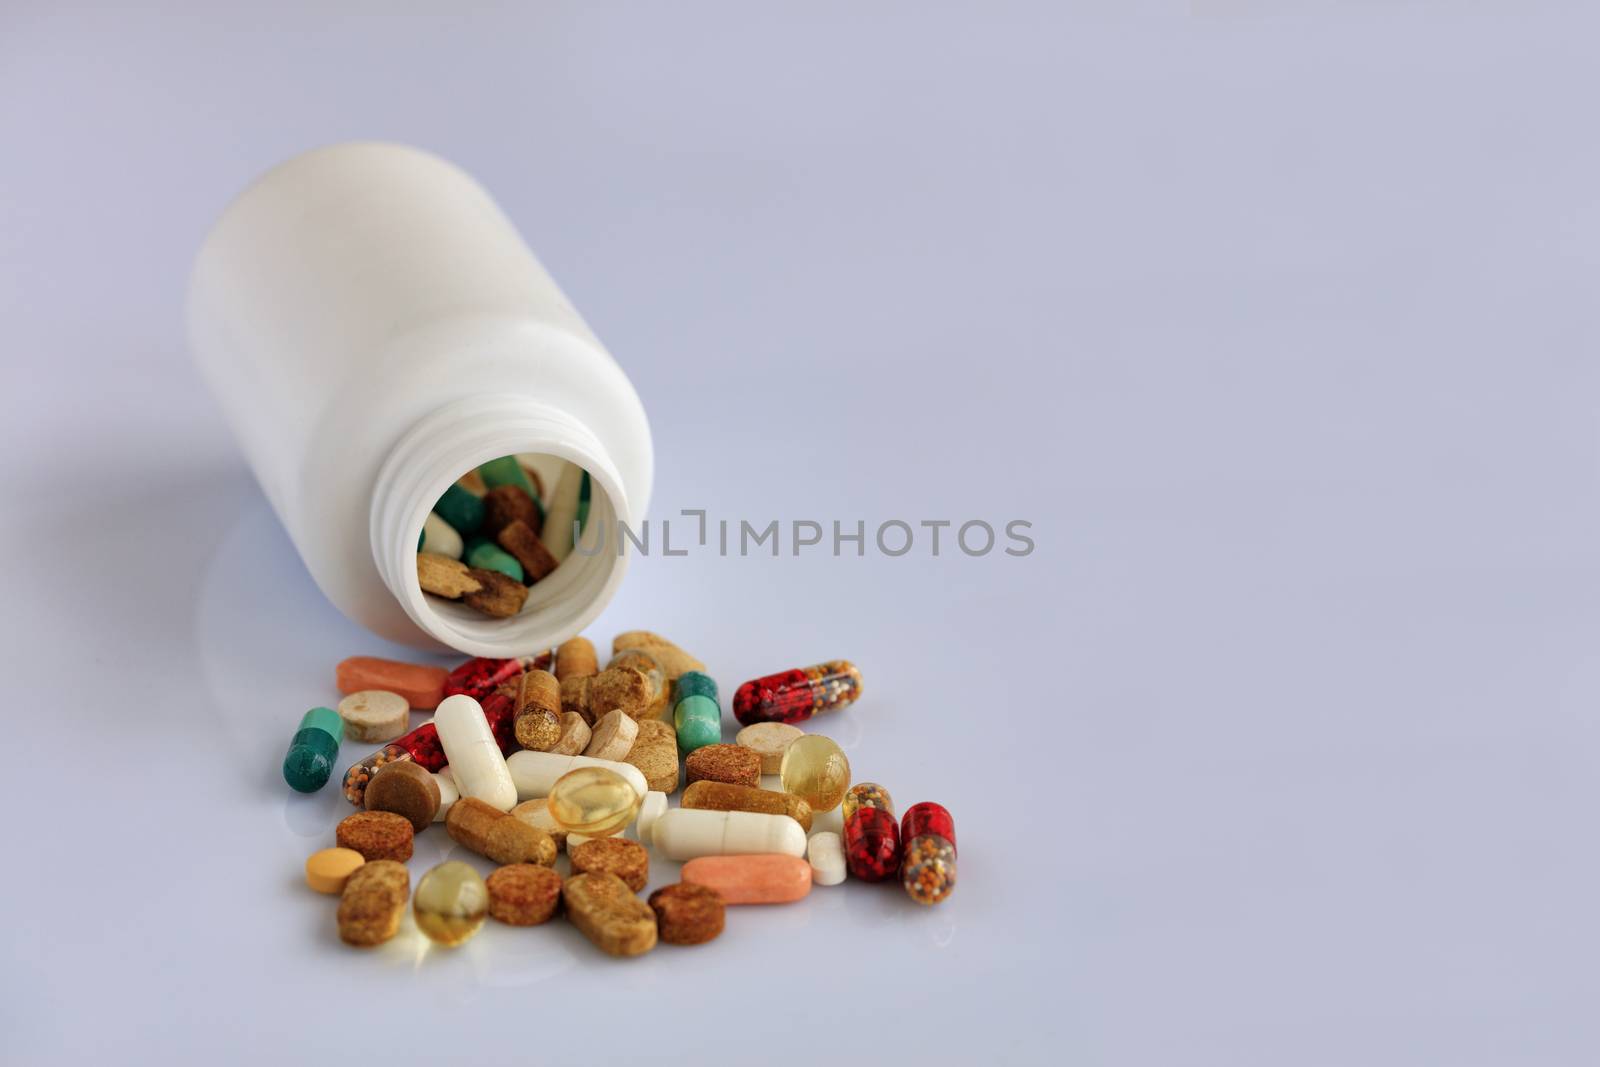 Tablets and capsules are scatter from a white bottle on a white smooth table.